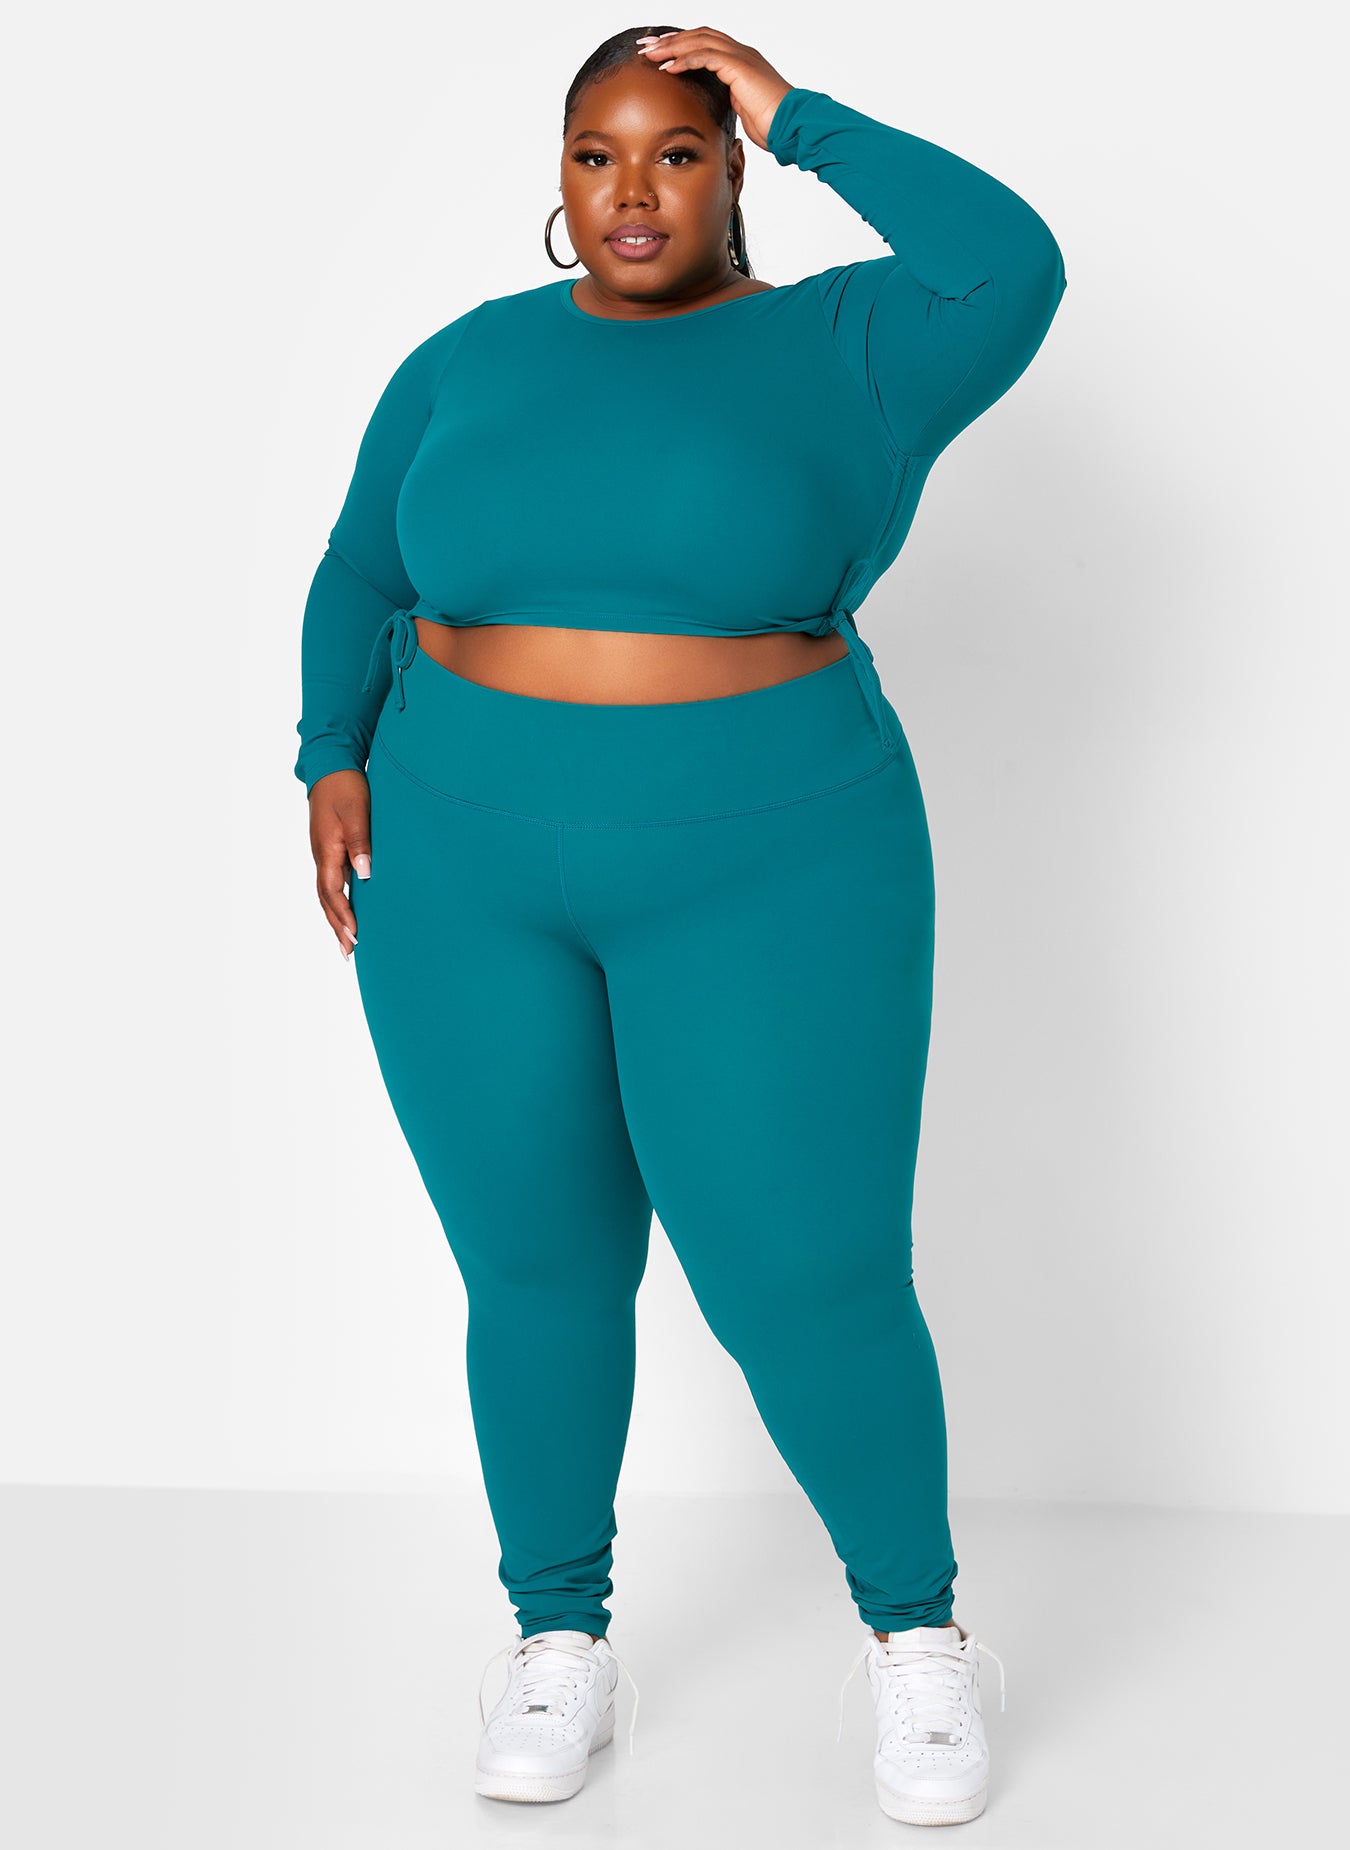 Teal Don`t Look Too Hard Ruched Back Sports Leggings Plus Sizes